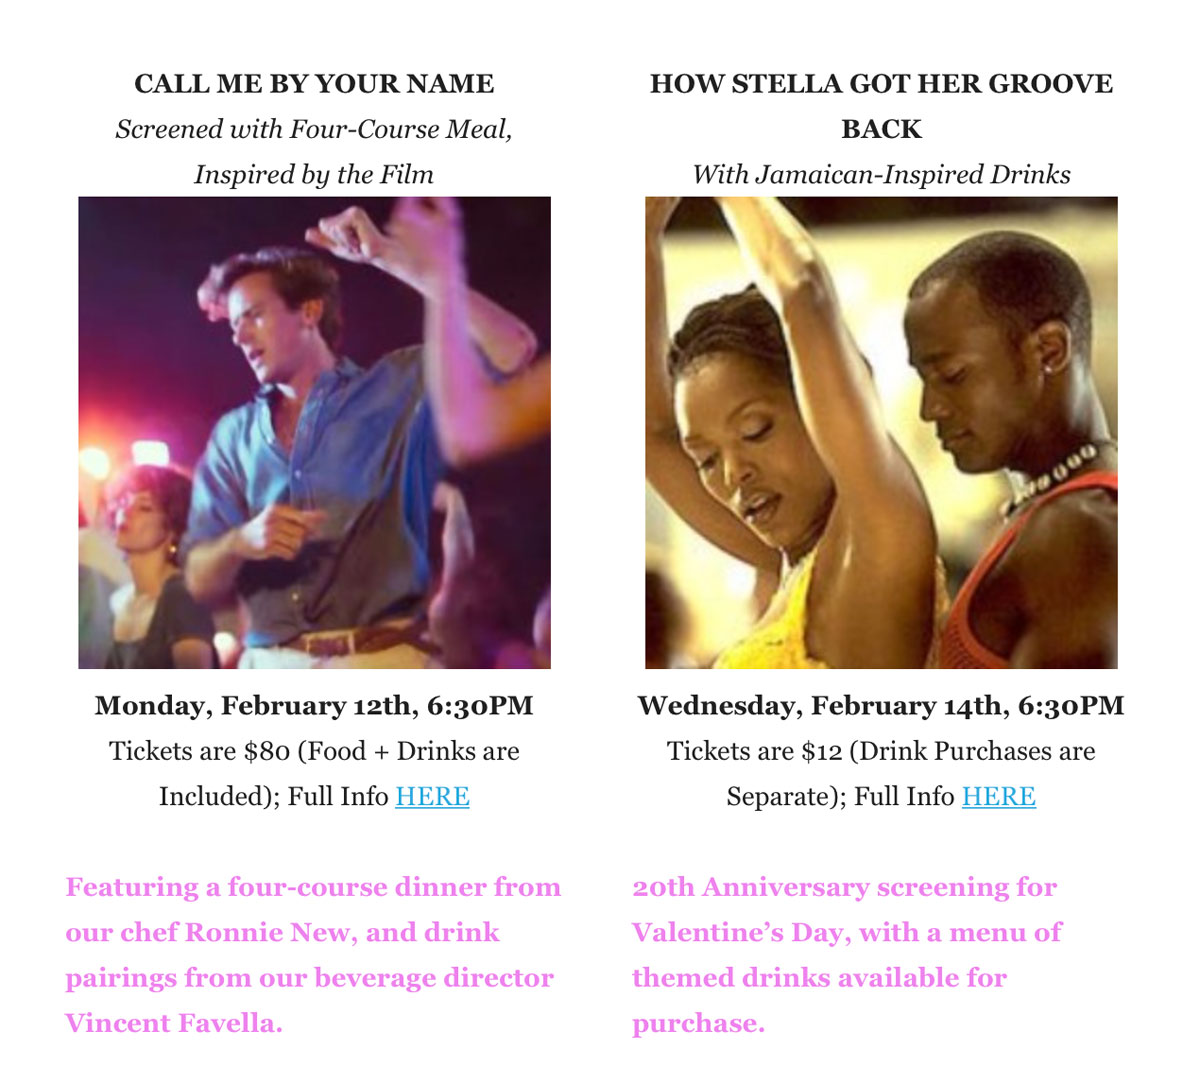 Alamo Call Me By Your Name and How Stella Got Her Groove Back Events